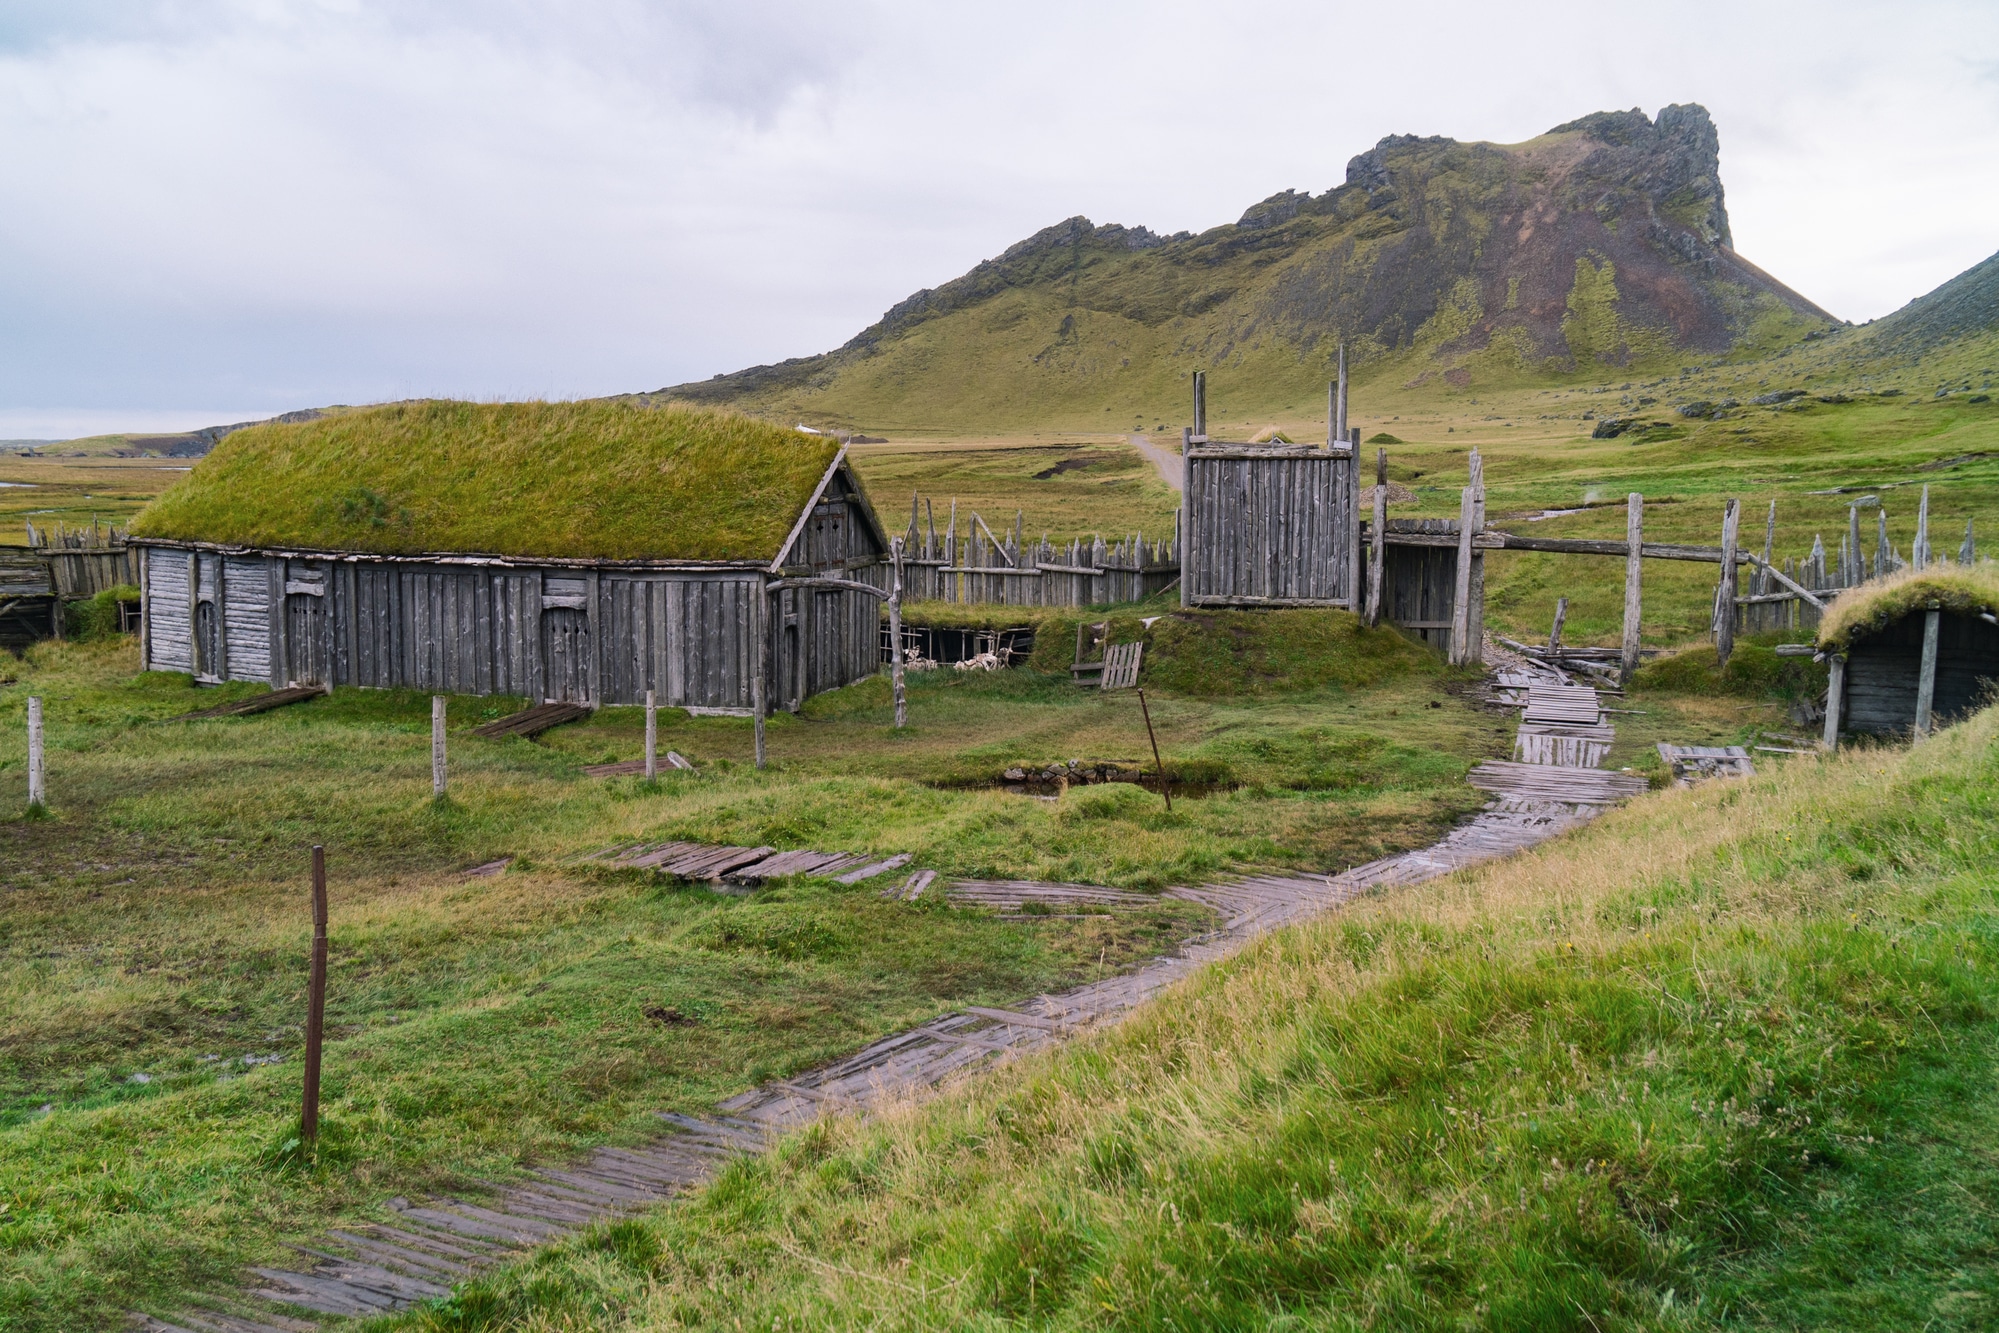 Vikings survived in Greenland for 450 to 500 years